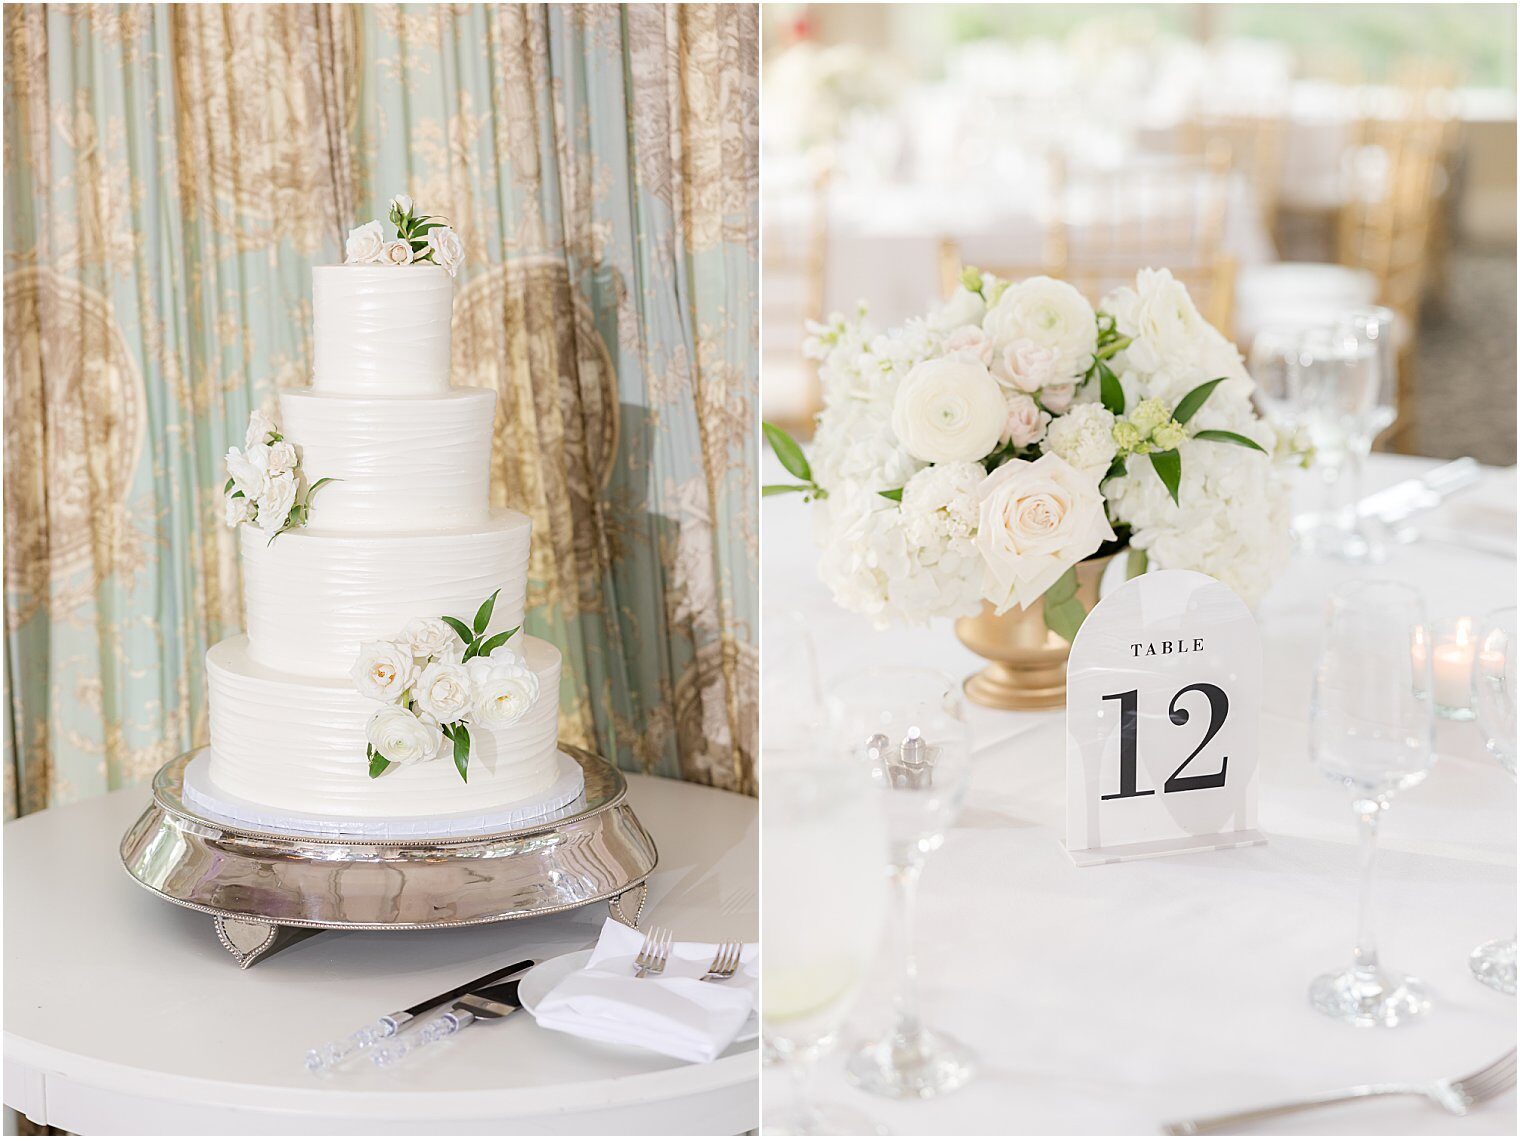 wedding cake and table details 